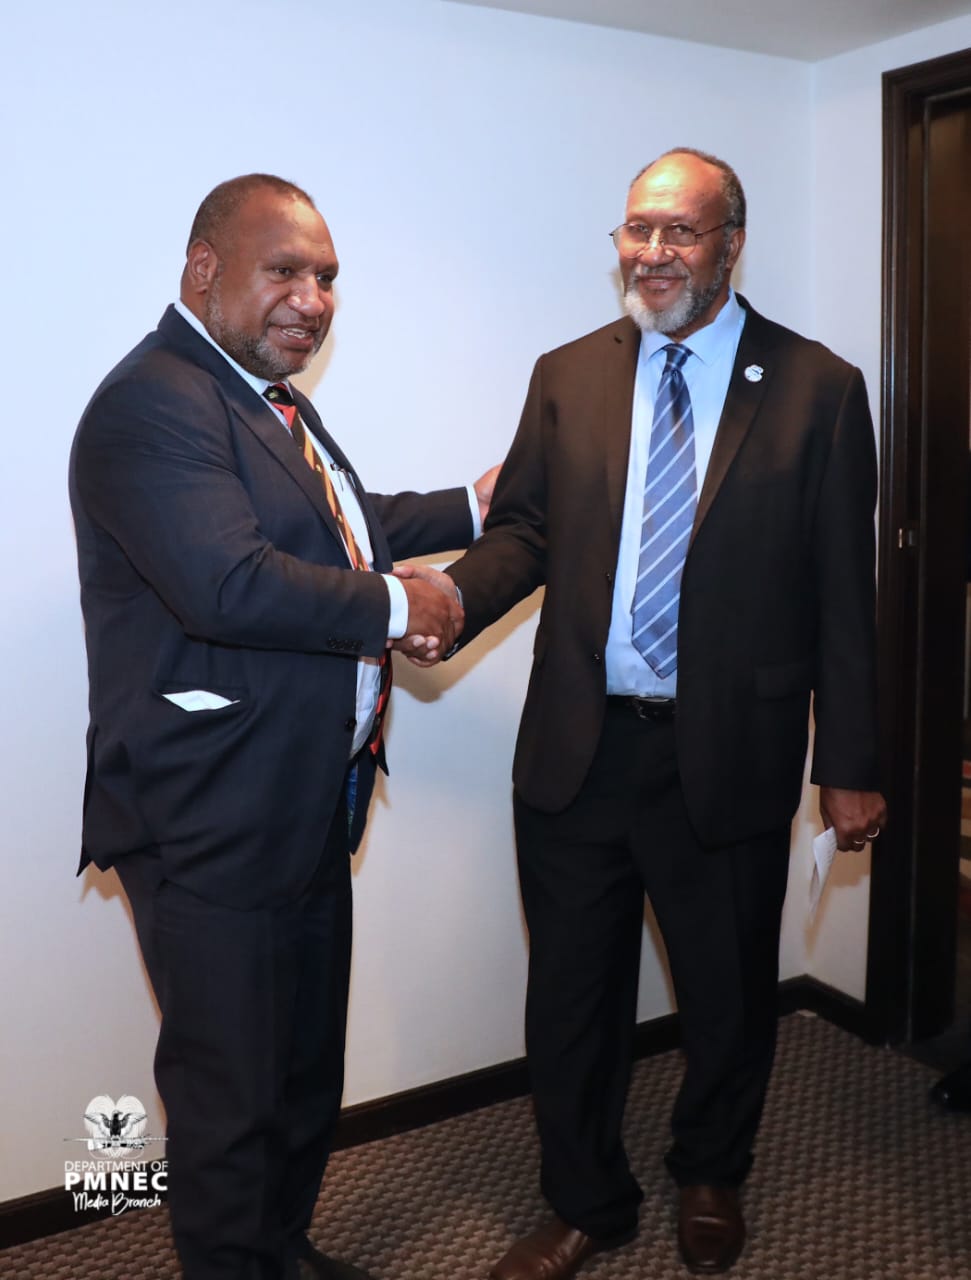 PAPUA NEW GUINEA OFFERS SUPPORT TO NEW SECRETARY GENERAL OF PACIFIC ISLANDS FORUM